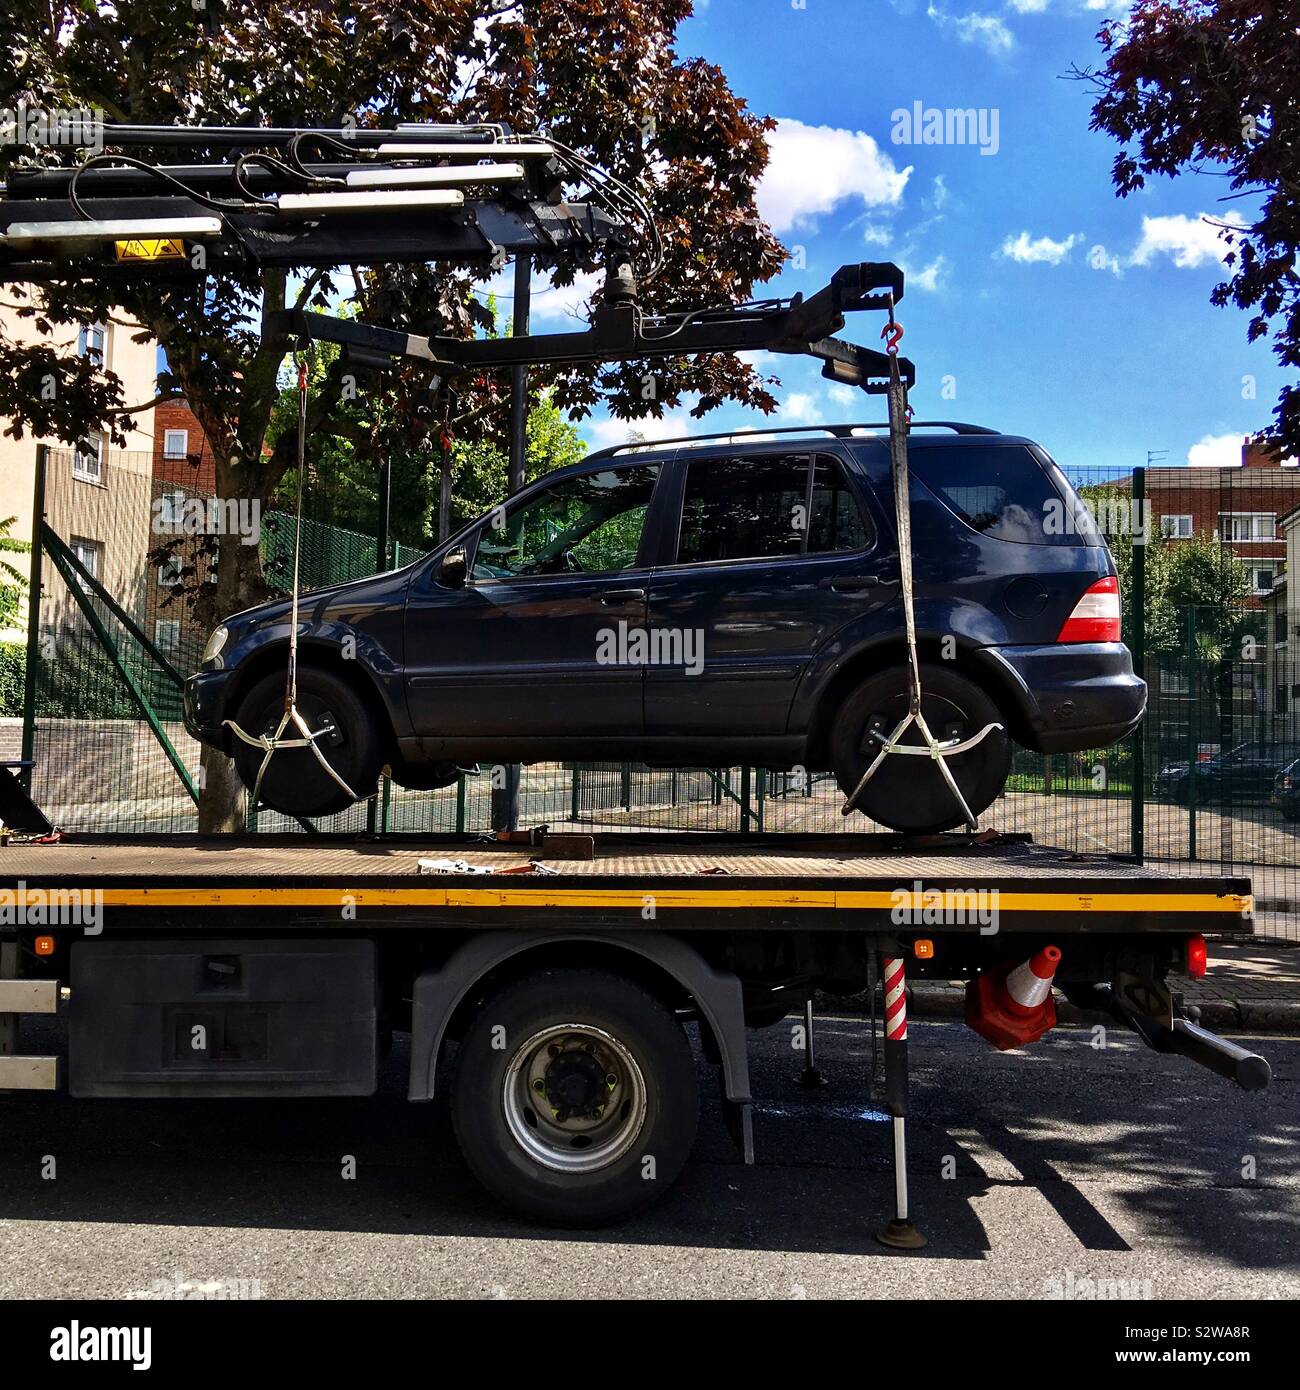 Car that was parked illegally is being lifted up onto a tow truck in Shoreditch, London, England UK Stock Photo